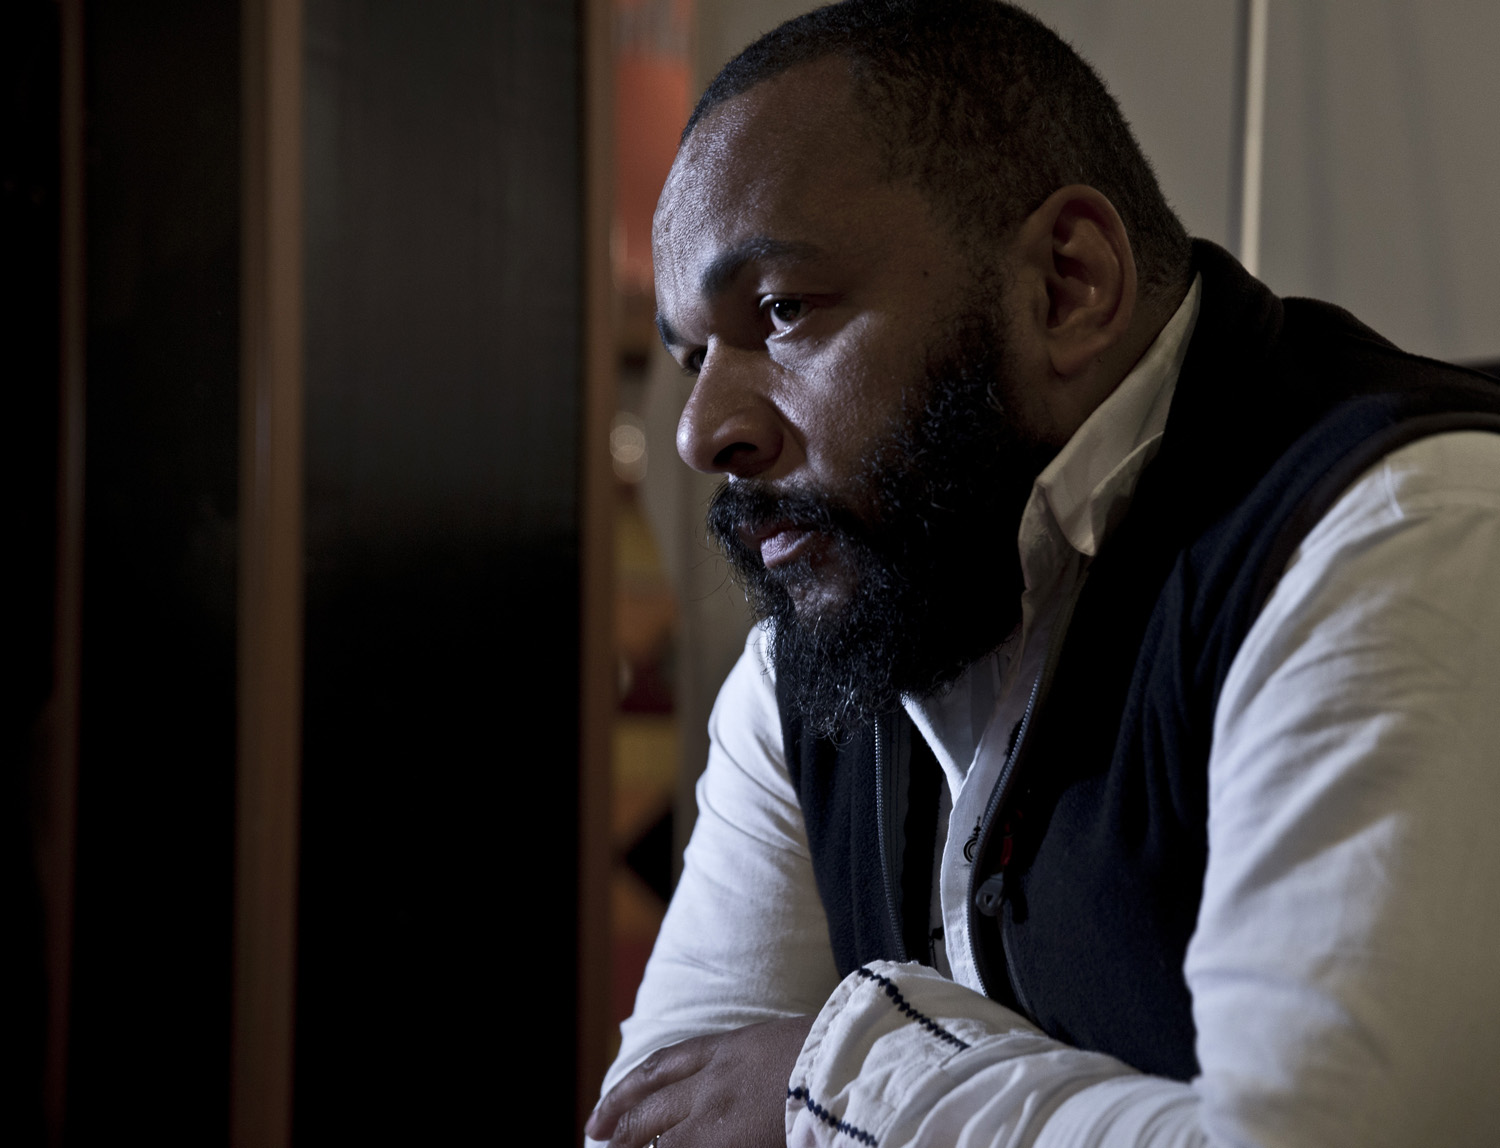 Dieudonné M’bala has become a star by targeting France’s Jews (Christopher Morris—VII for TIME)